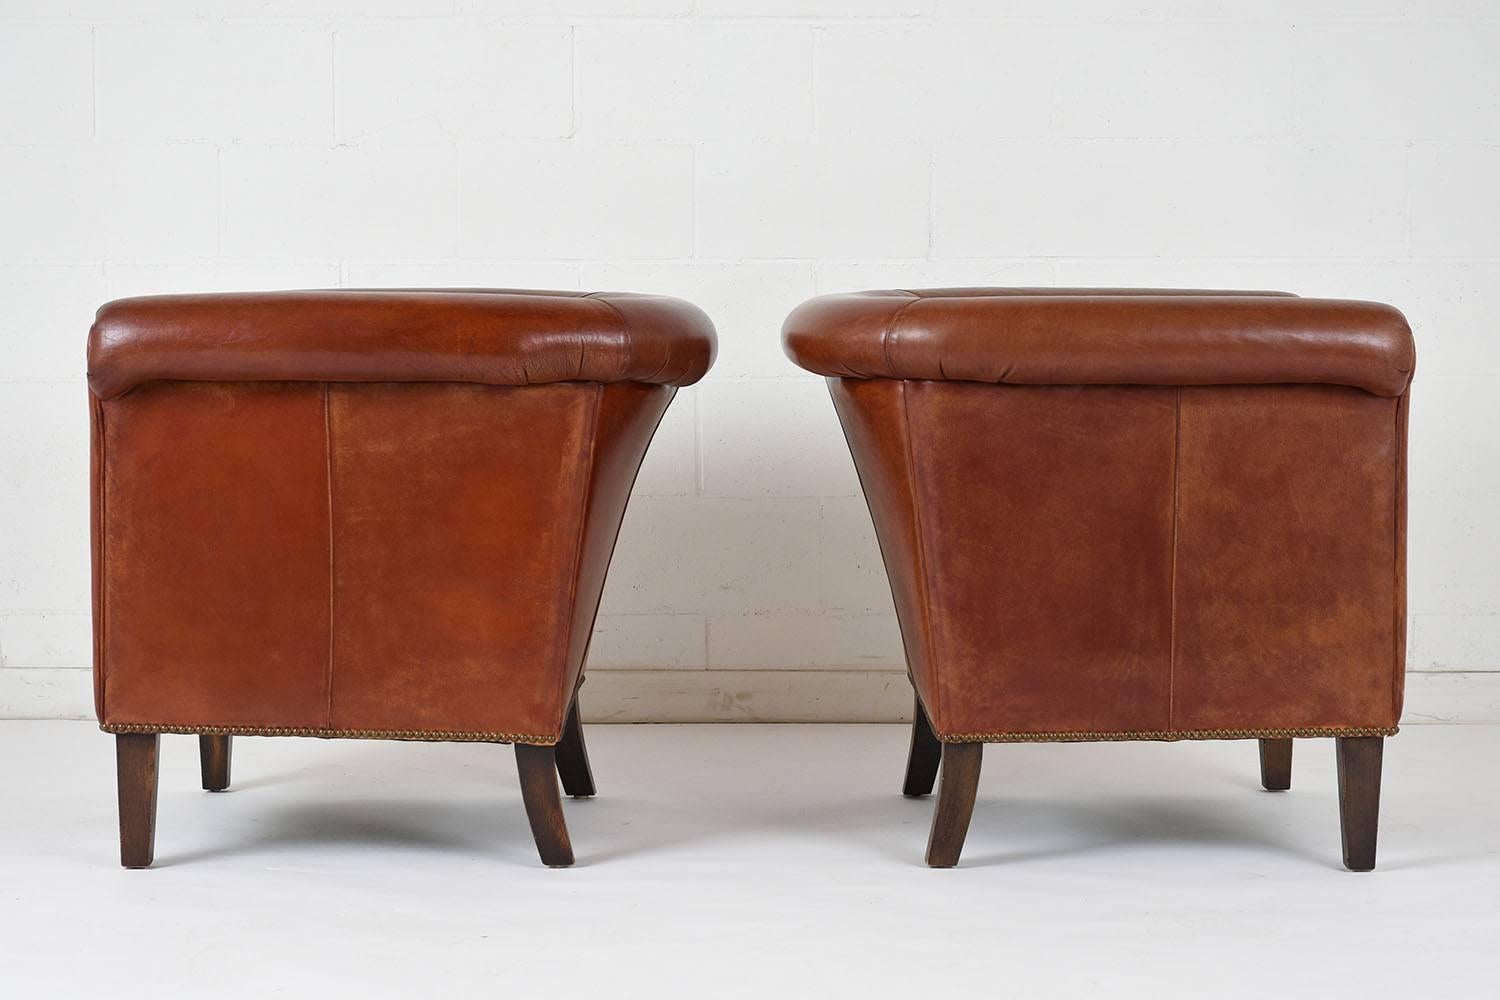 American Pair of Regency-Style Bernhardt Leather Club Chairs